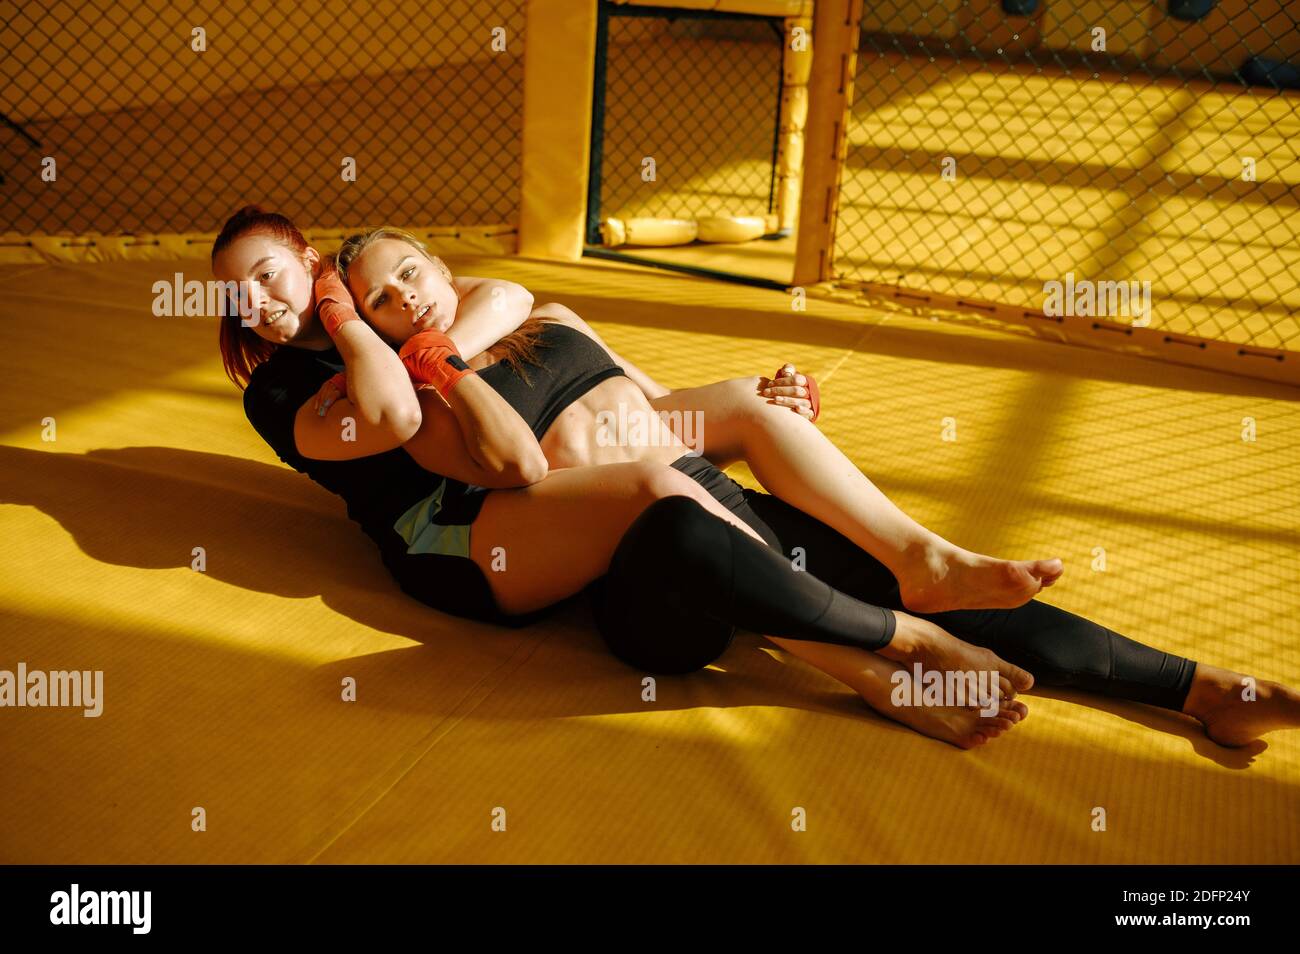 Female MMA fighter performs painful choke hold Stock Photo